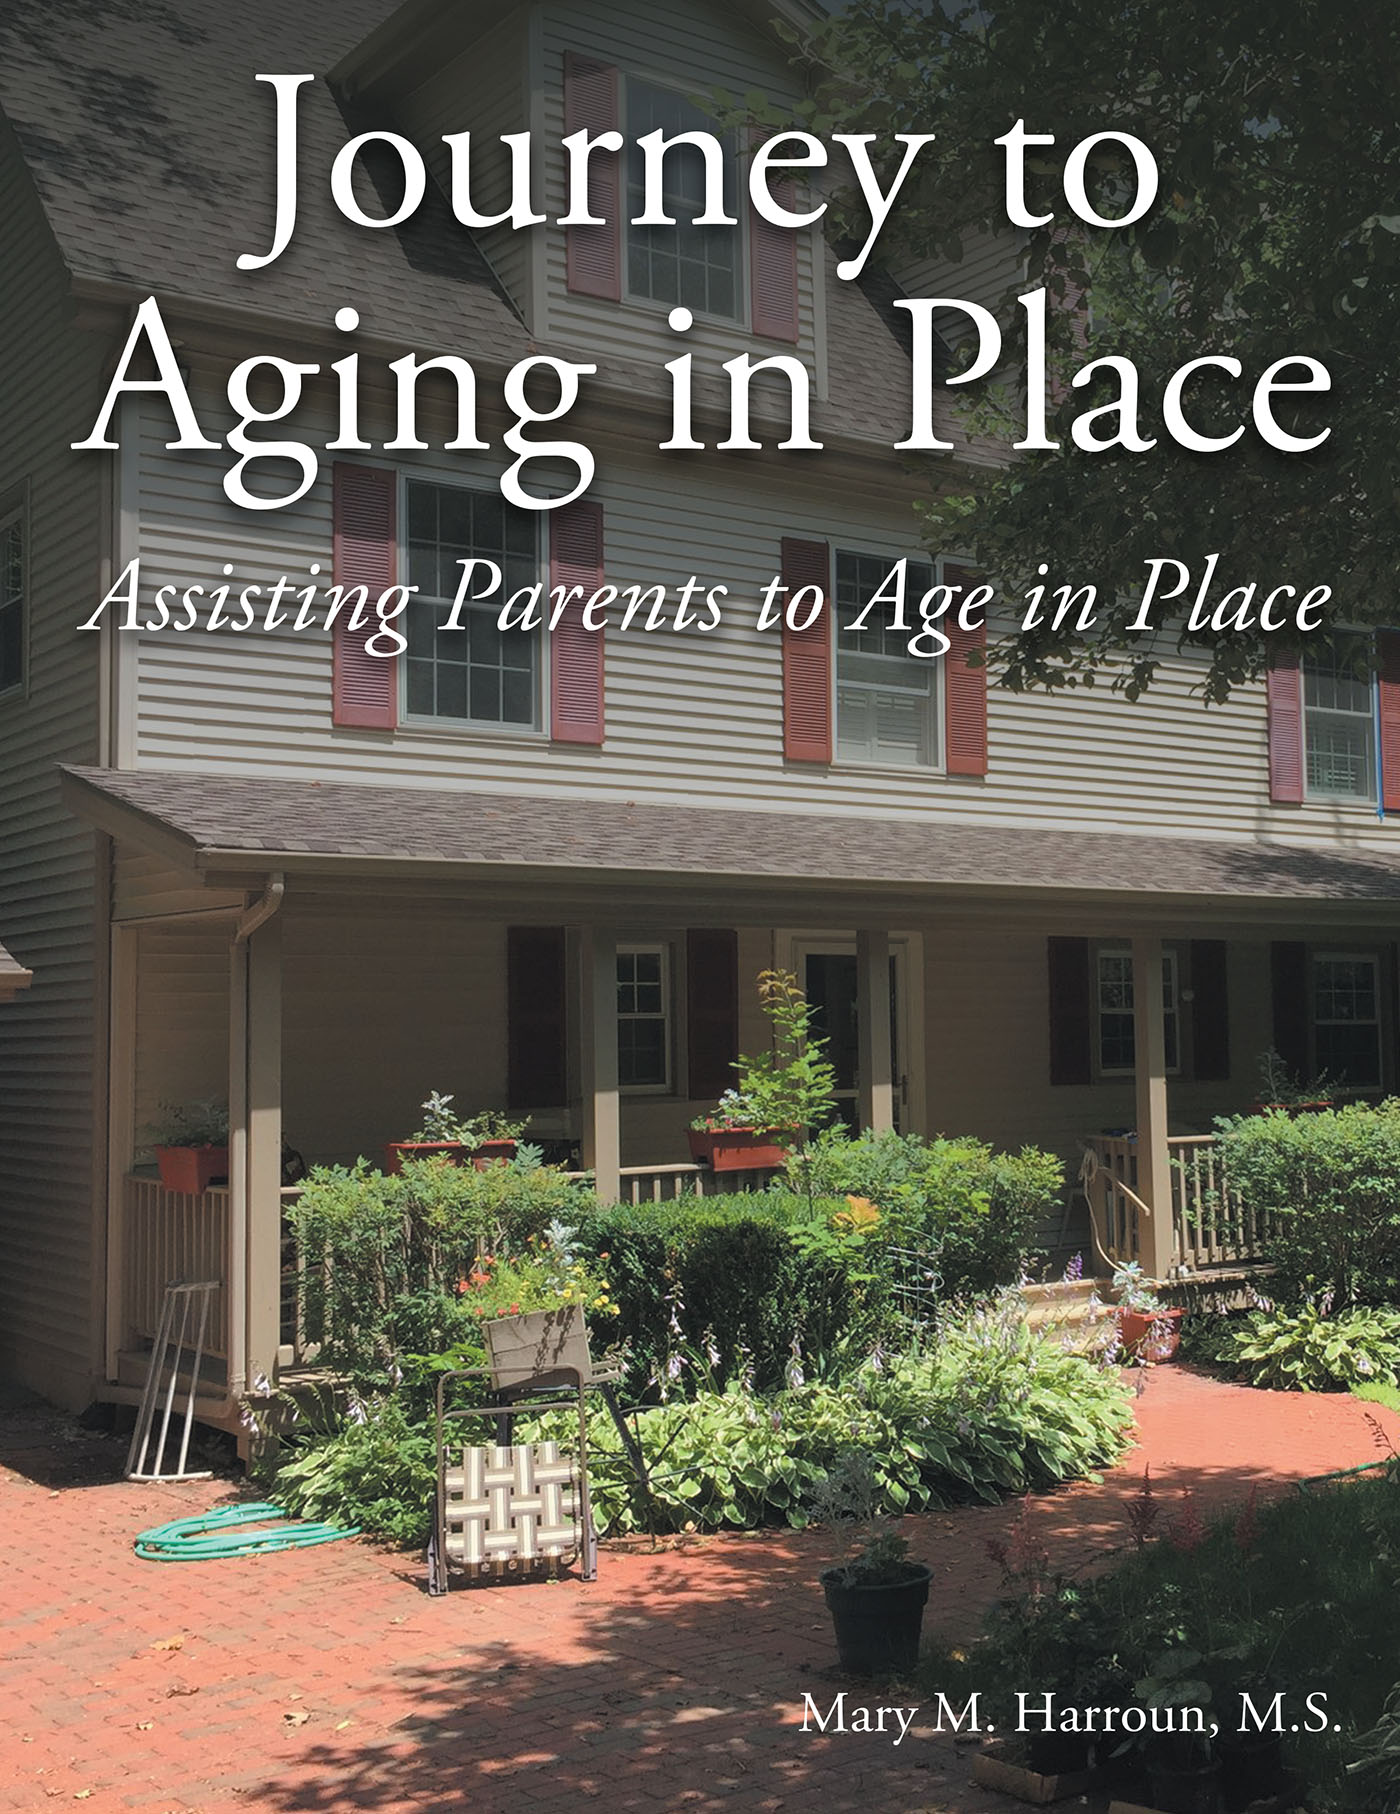 Book cover of Journey to Aging in Place by Mary M. Harroun